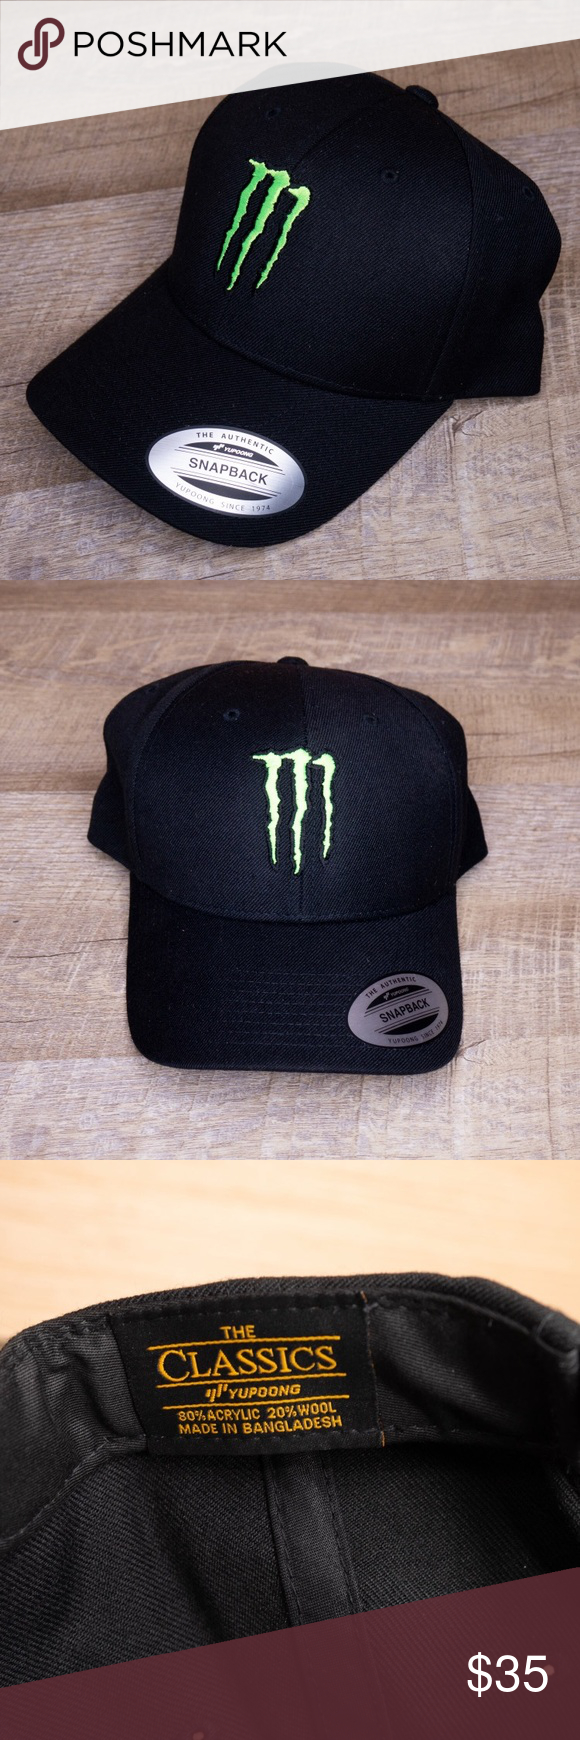 New, Official Monster Energy Gear Snapback Hat New pour Monster Energy Clothing